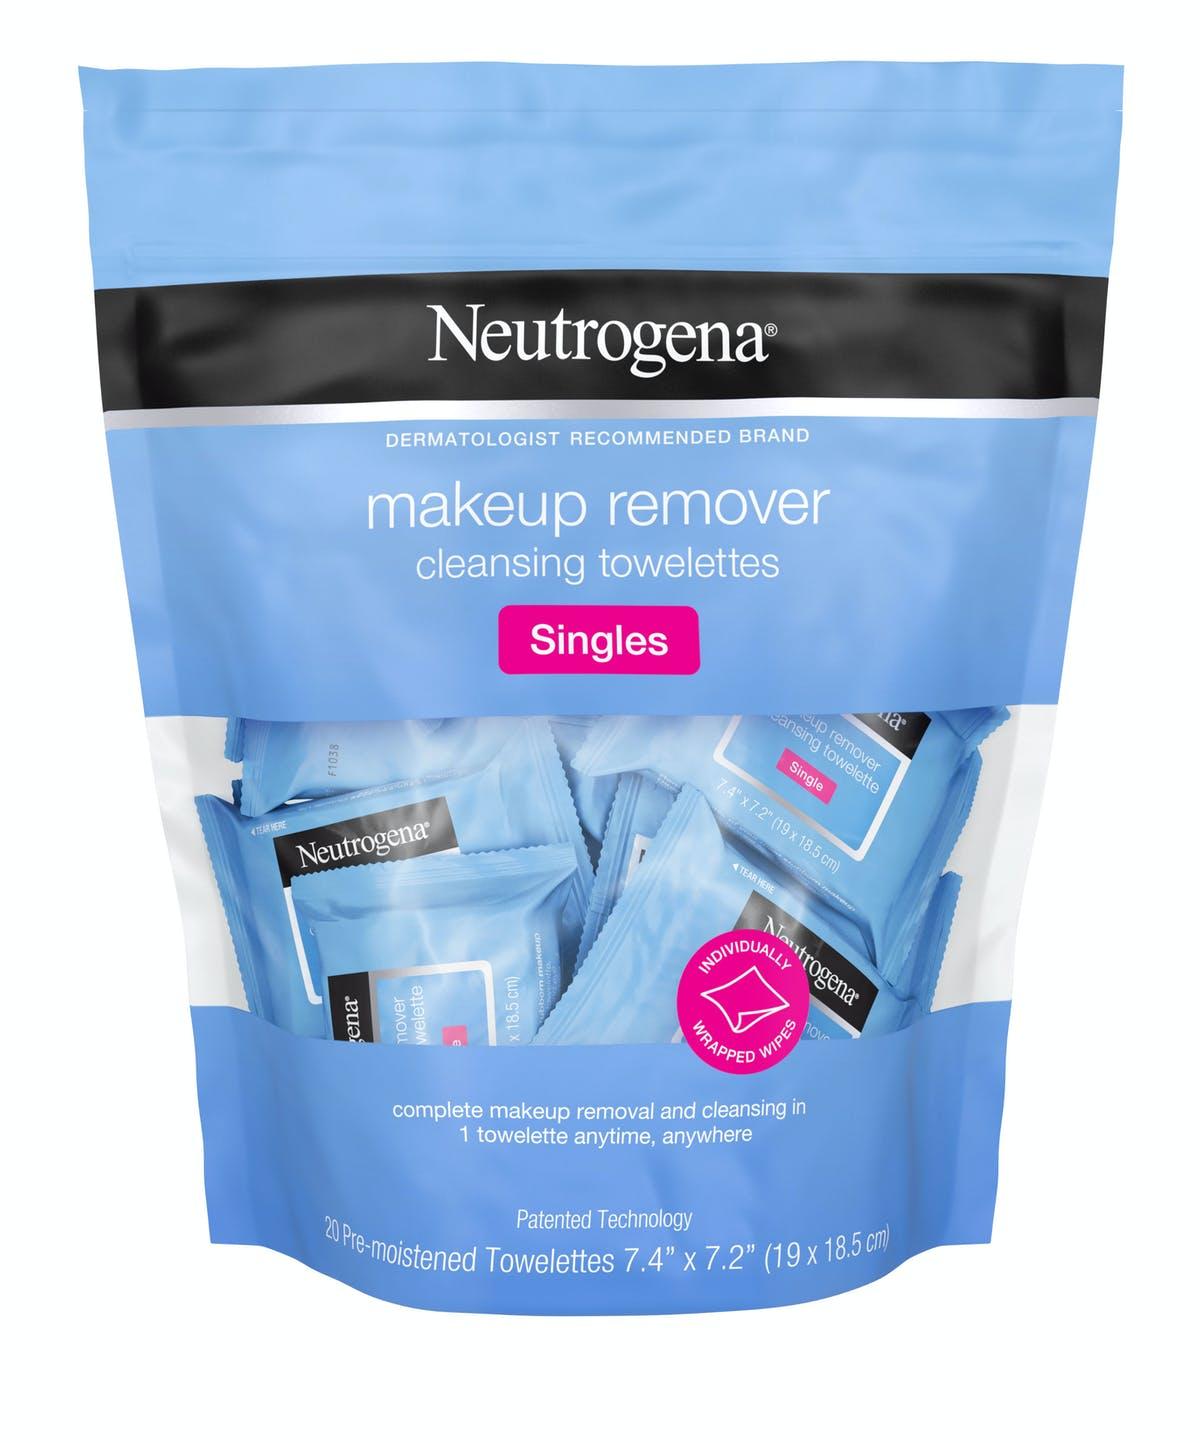 Neutrogena Makeup remover cleansing towelettes (Singles)